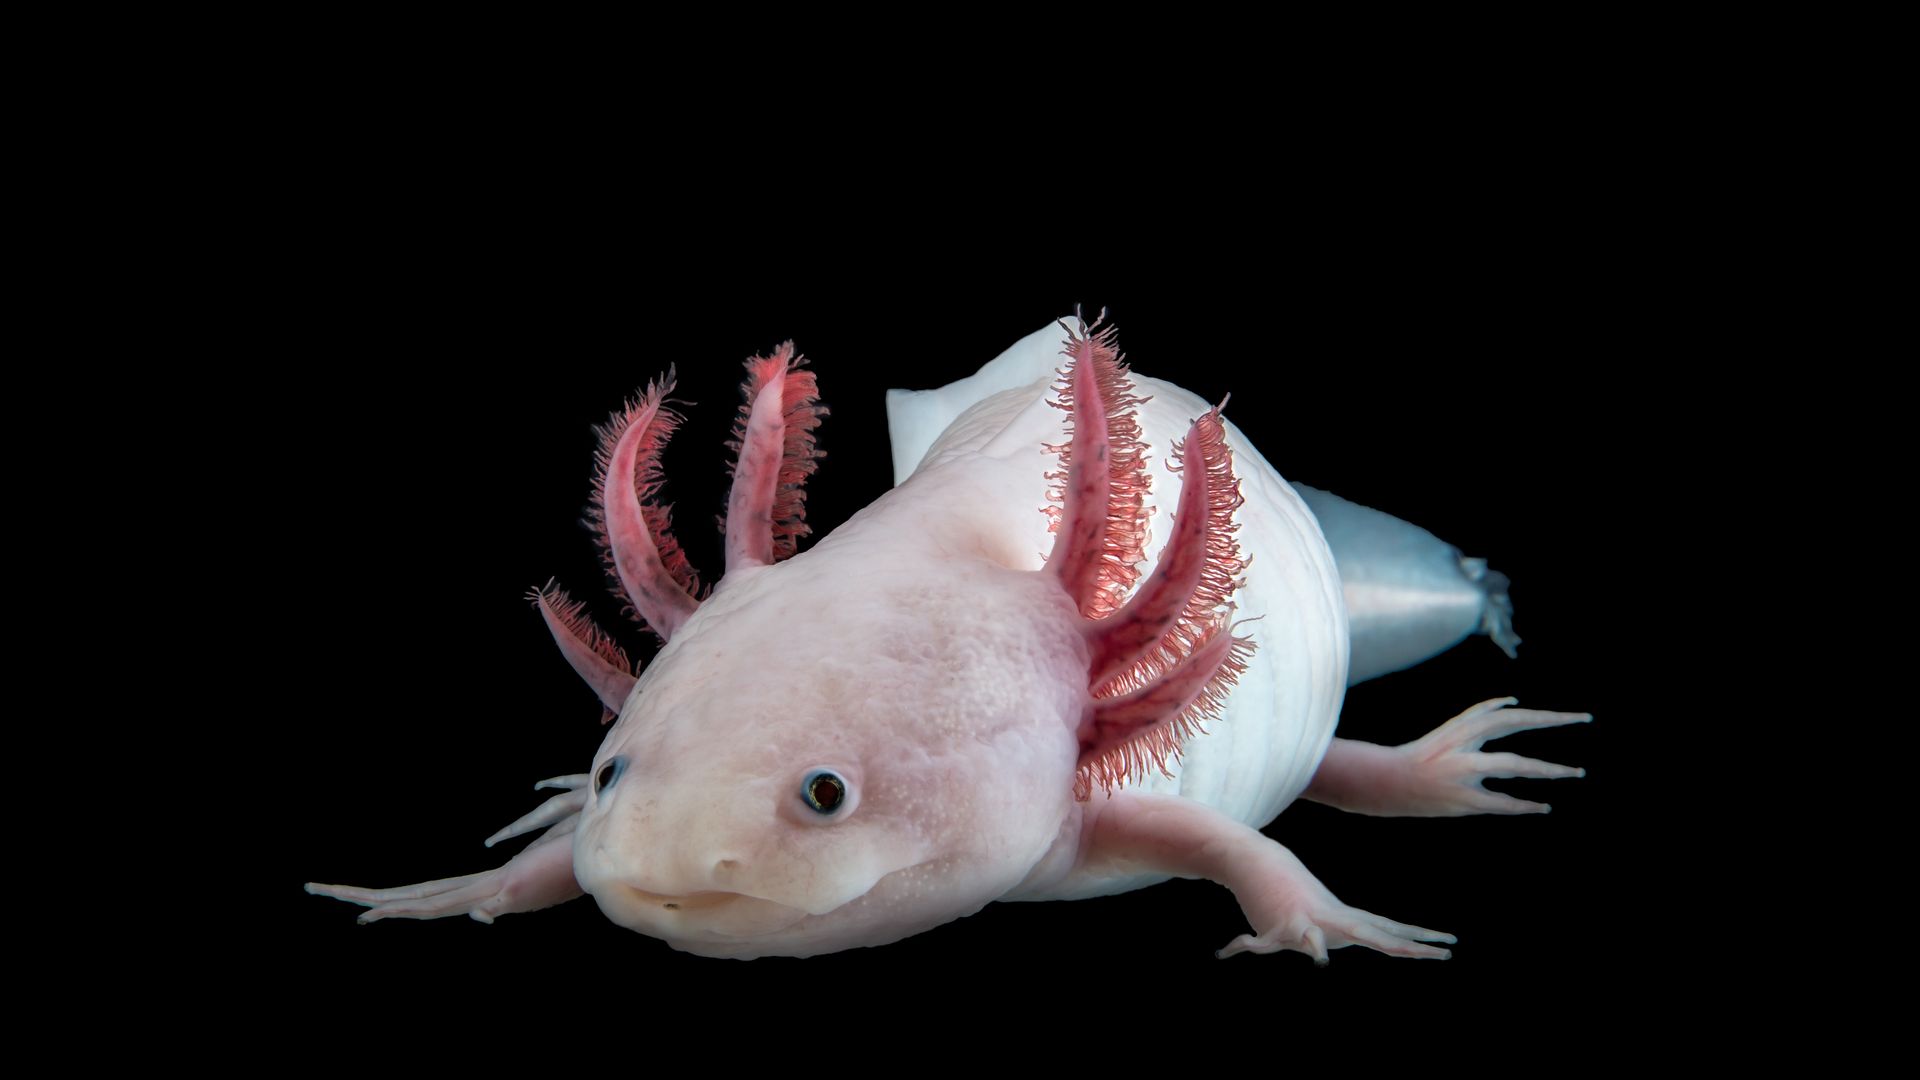 The Mexican axolotl Ambystoma mexicanum is a model organism for regeneration research. 